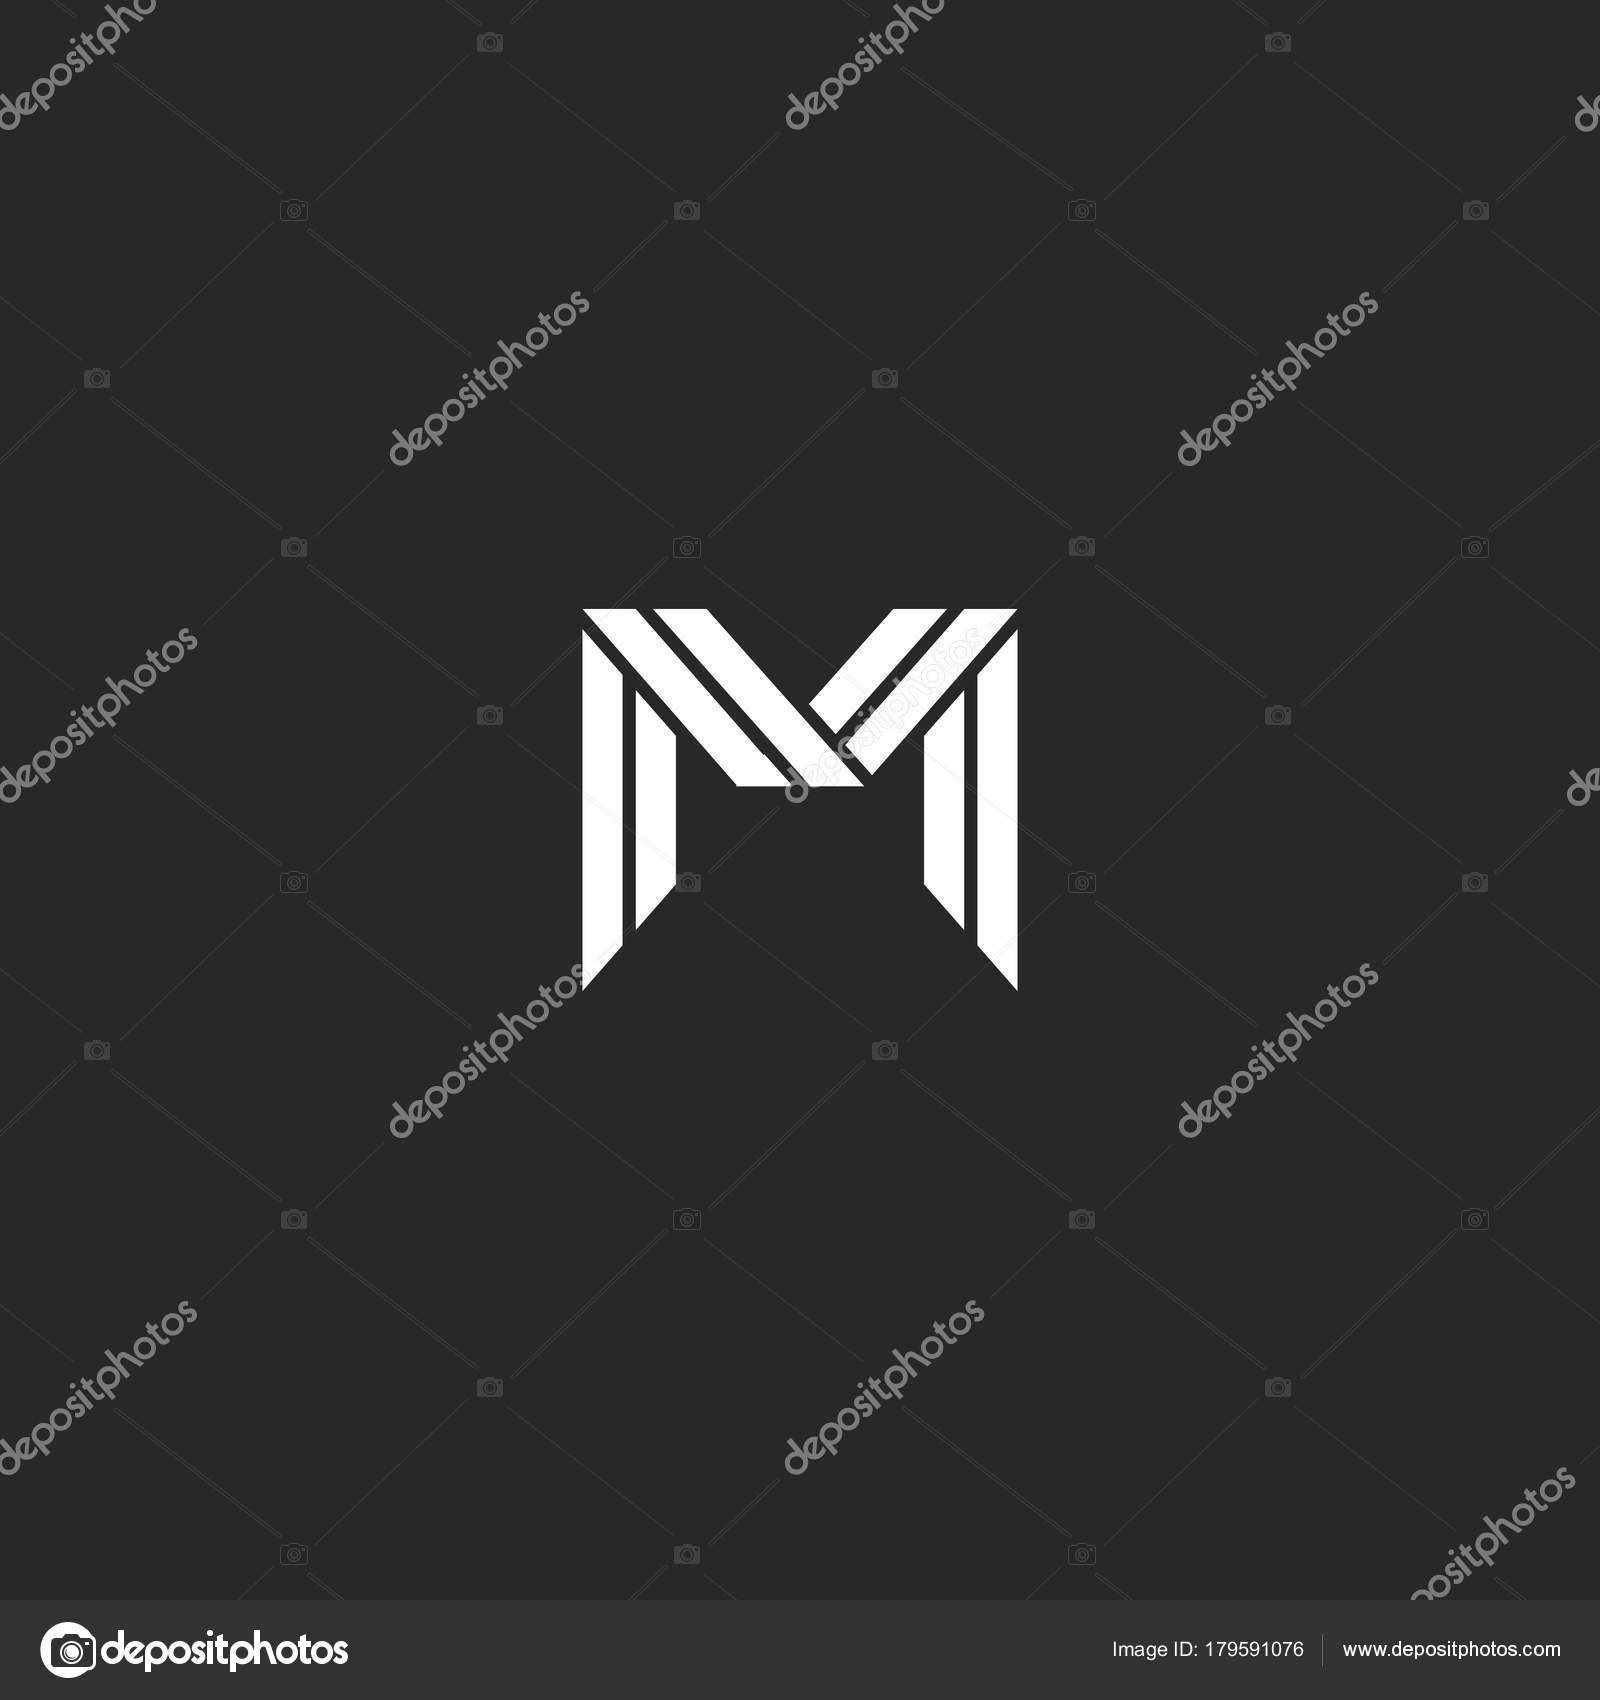 MM monogram with medieval style, luxury and elegant initial logo